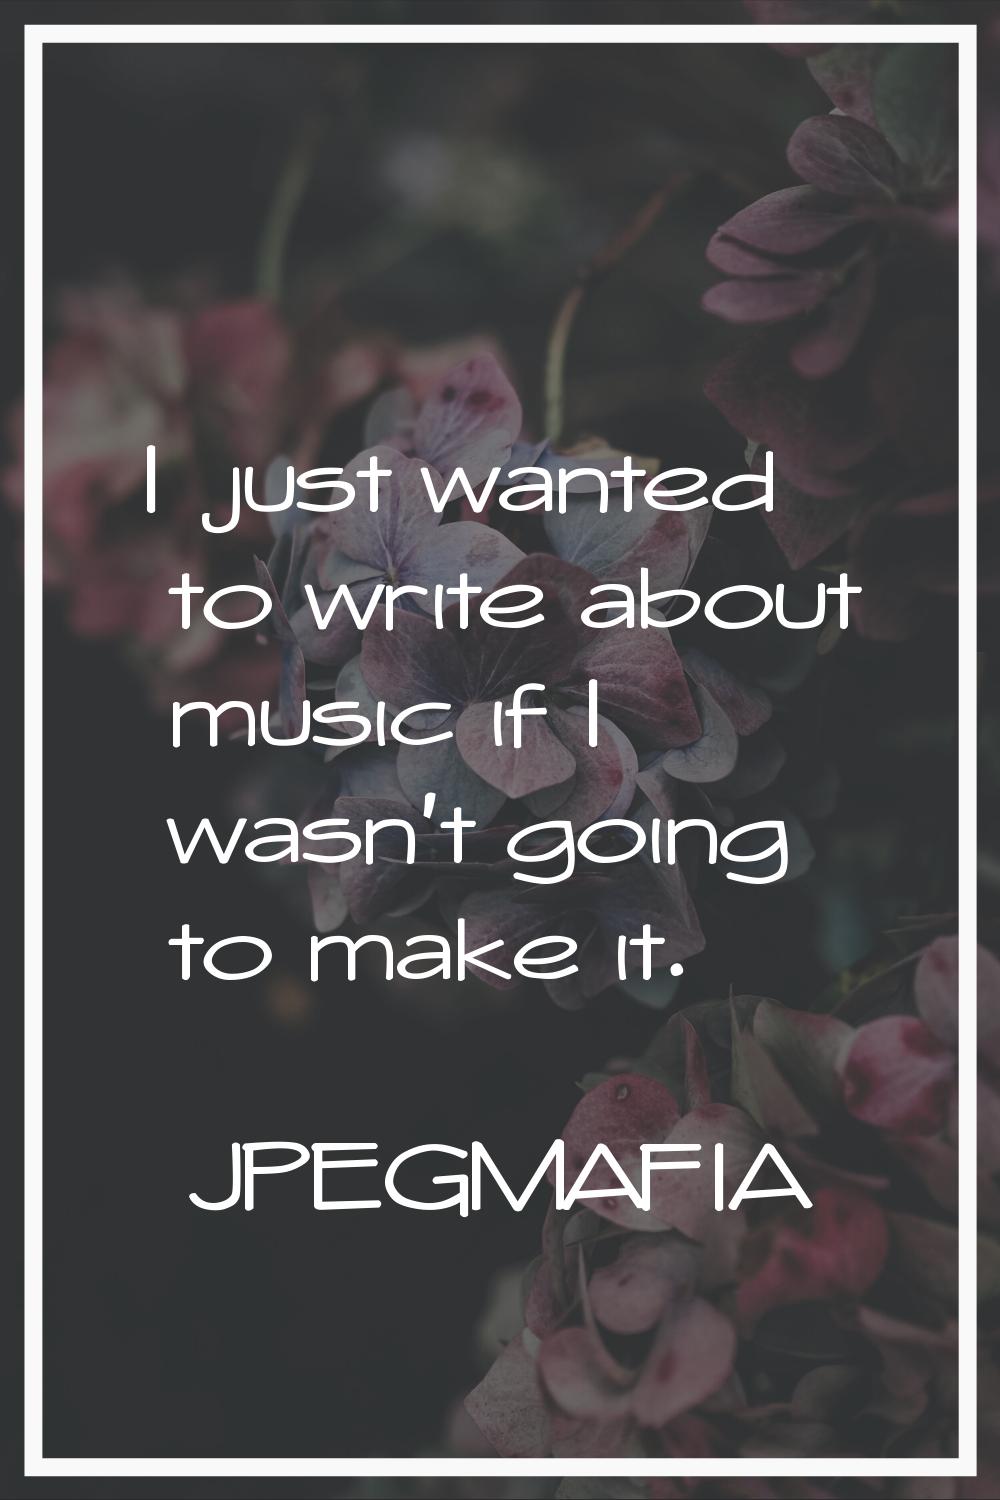 I just wanted to write about music if I wasn't going to make it.